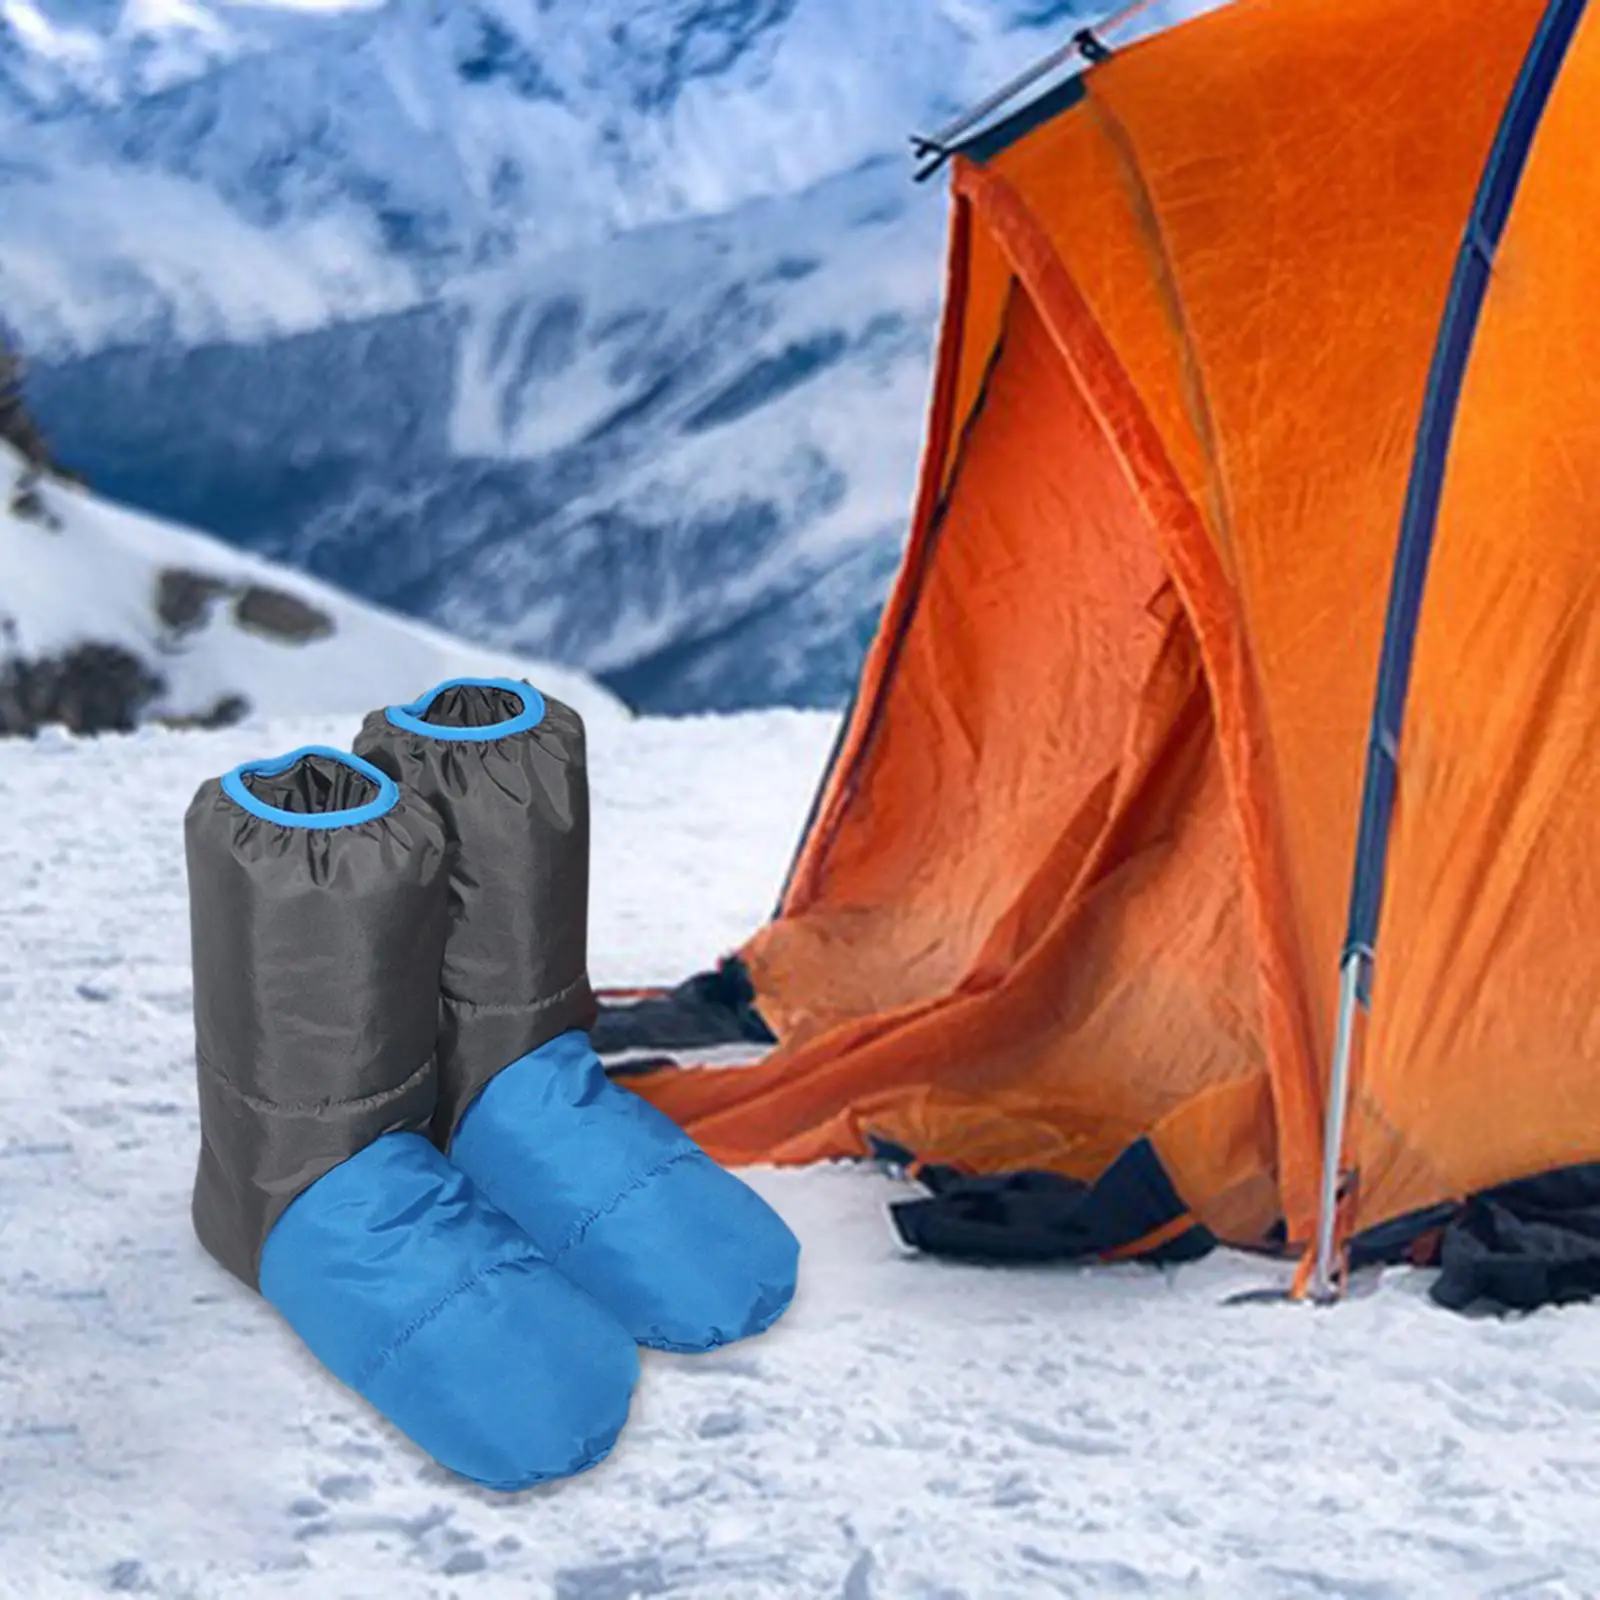 Down Booties Winter Warm Socks Shoes Foot Sock Footwear Sleeping Slippers Down Boots for Camping Bed Adults Sleeping Bag Tent